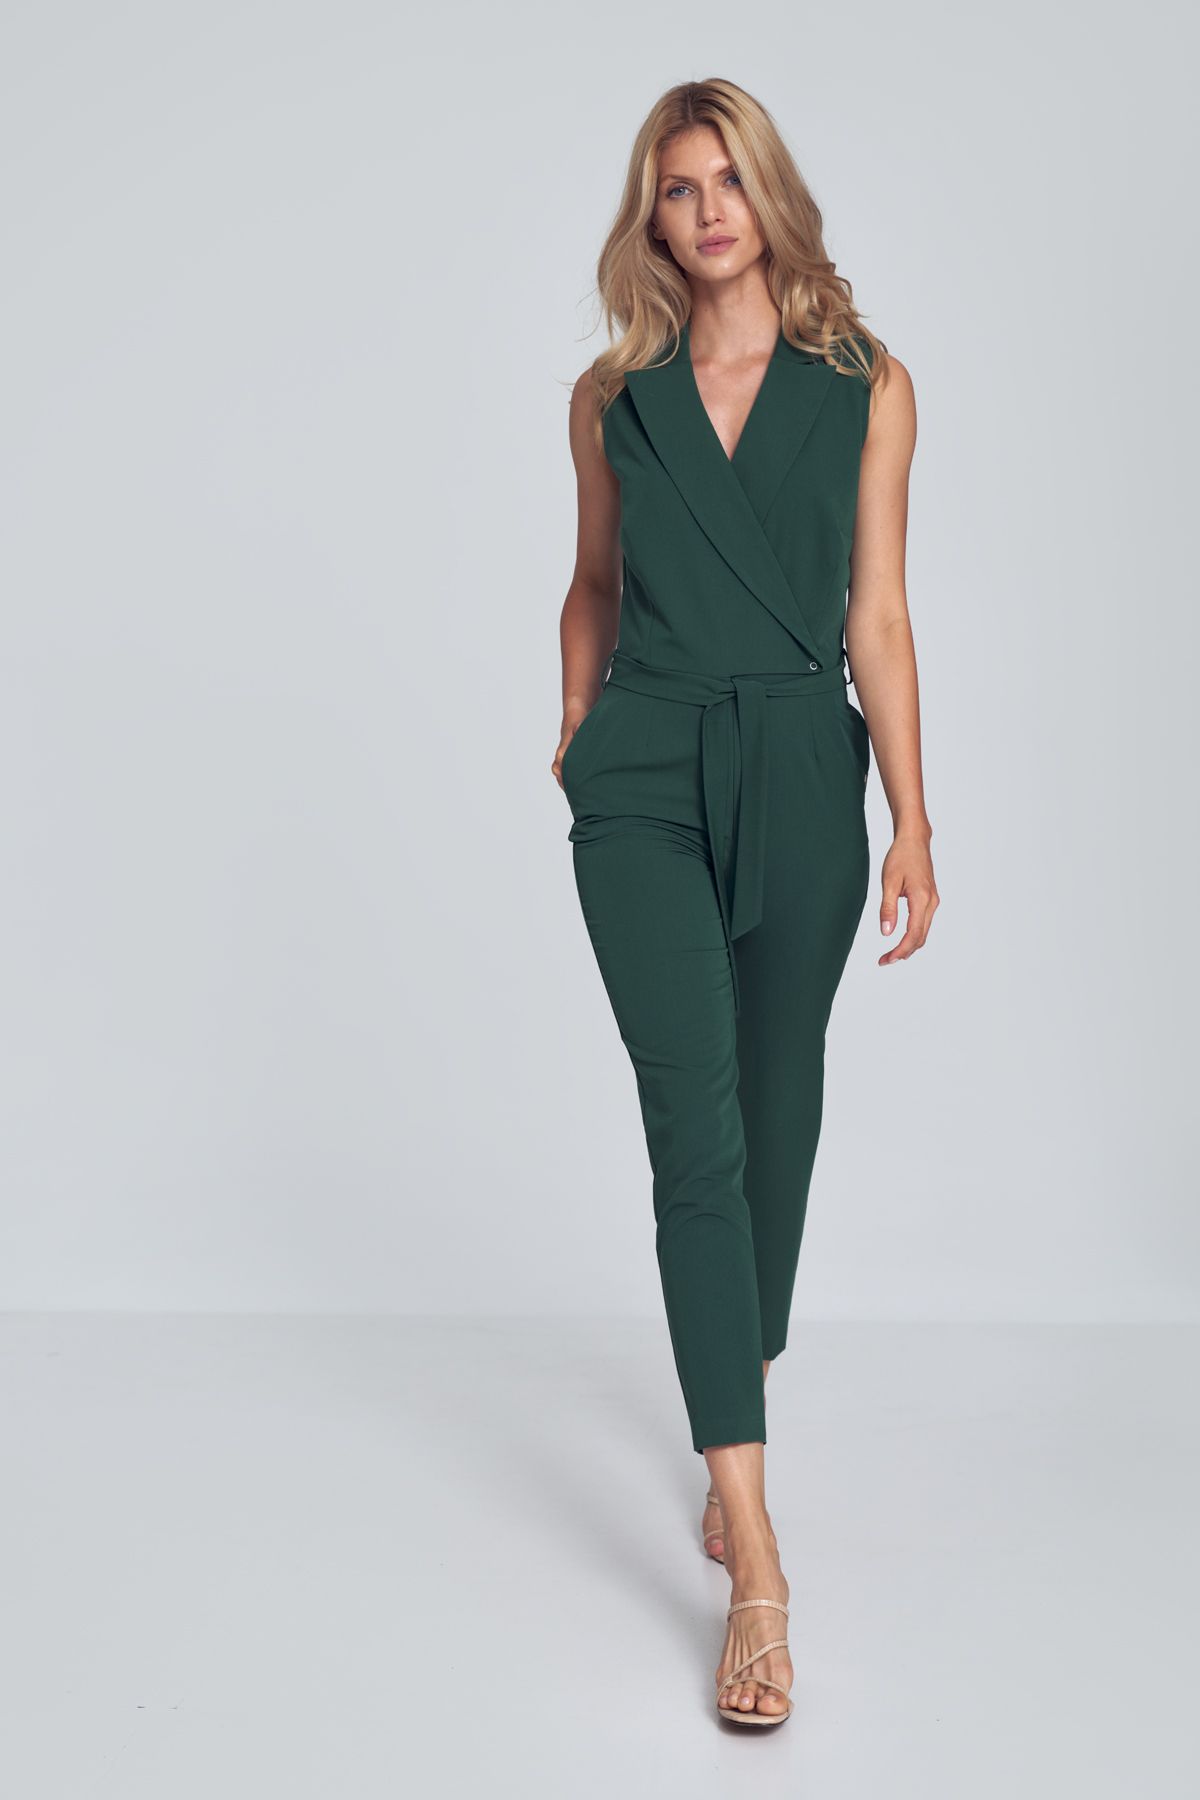 Green V-neck jumpsuit with a collar, sleeveless, tied at the waist, loose legs tapered to the bottom. Fastened at the front at the waist with one external and internal snaps and a covered zipper. Pockets in the side seams.